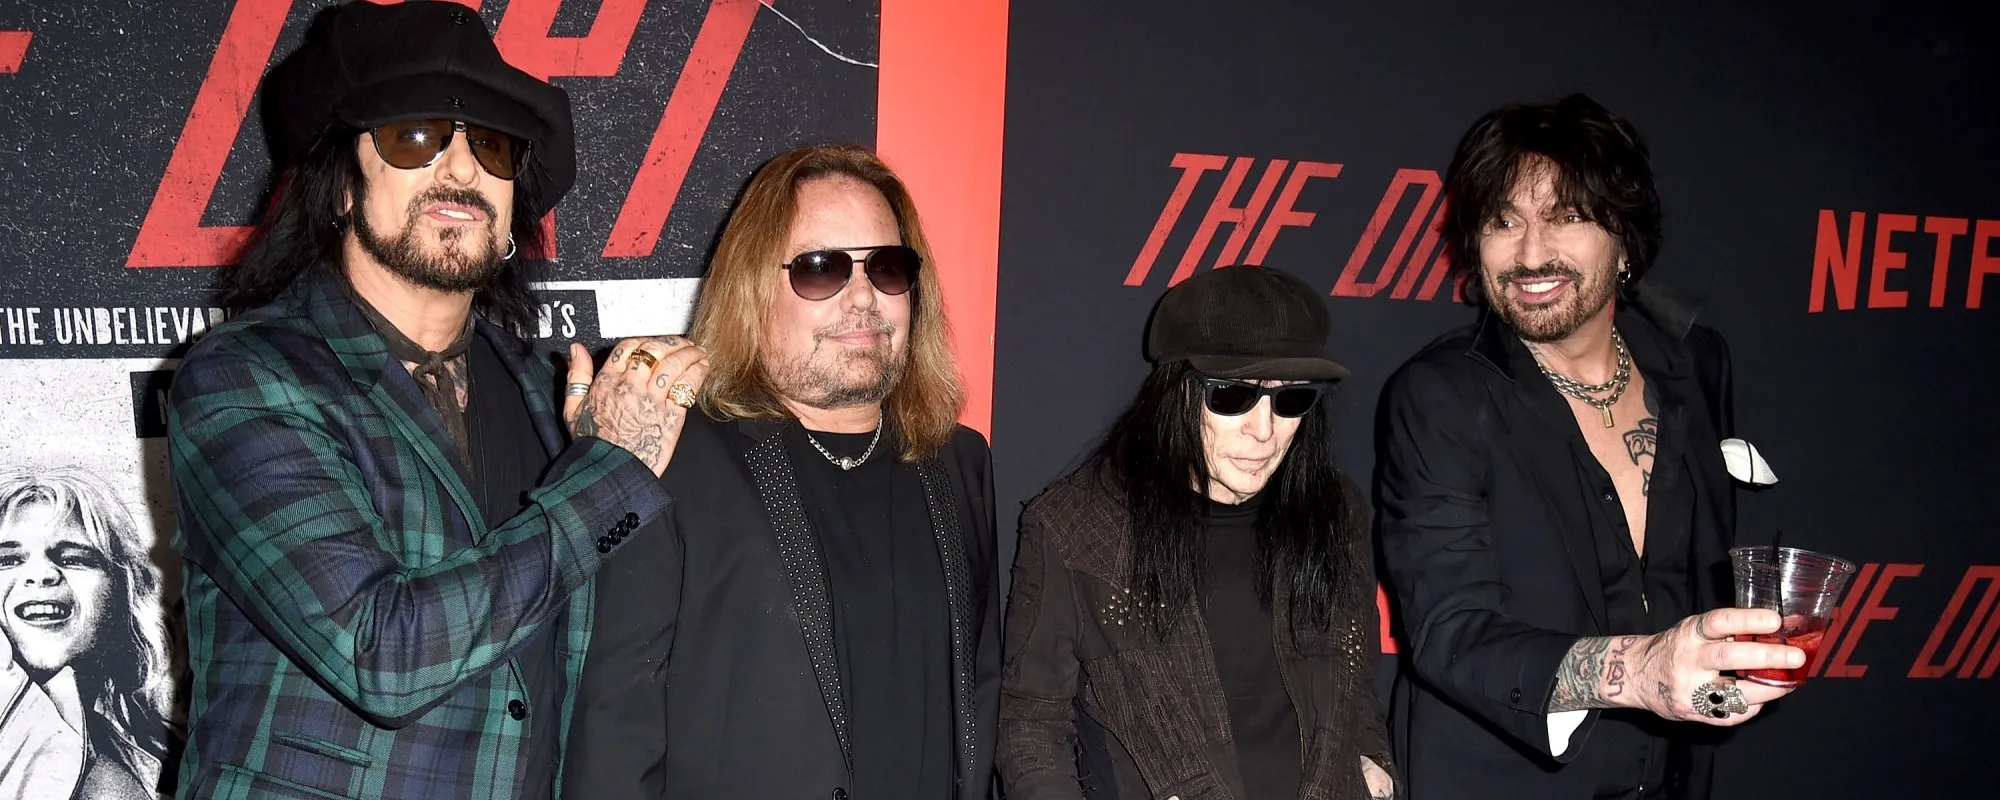 Mick Mars Sounds Off on “Impossible” Mötley Crüe Reunion